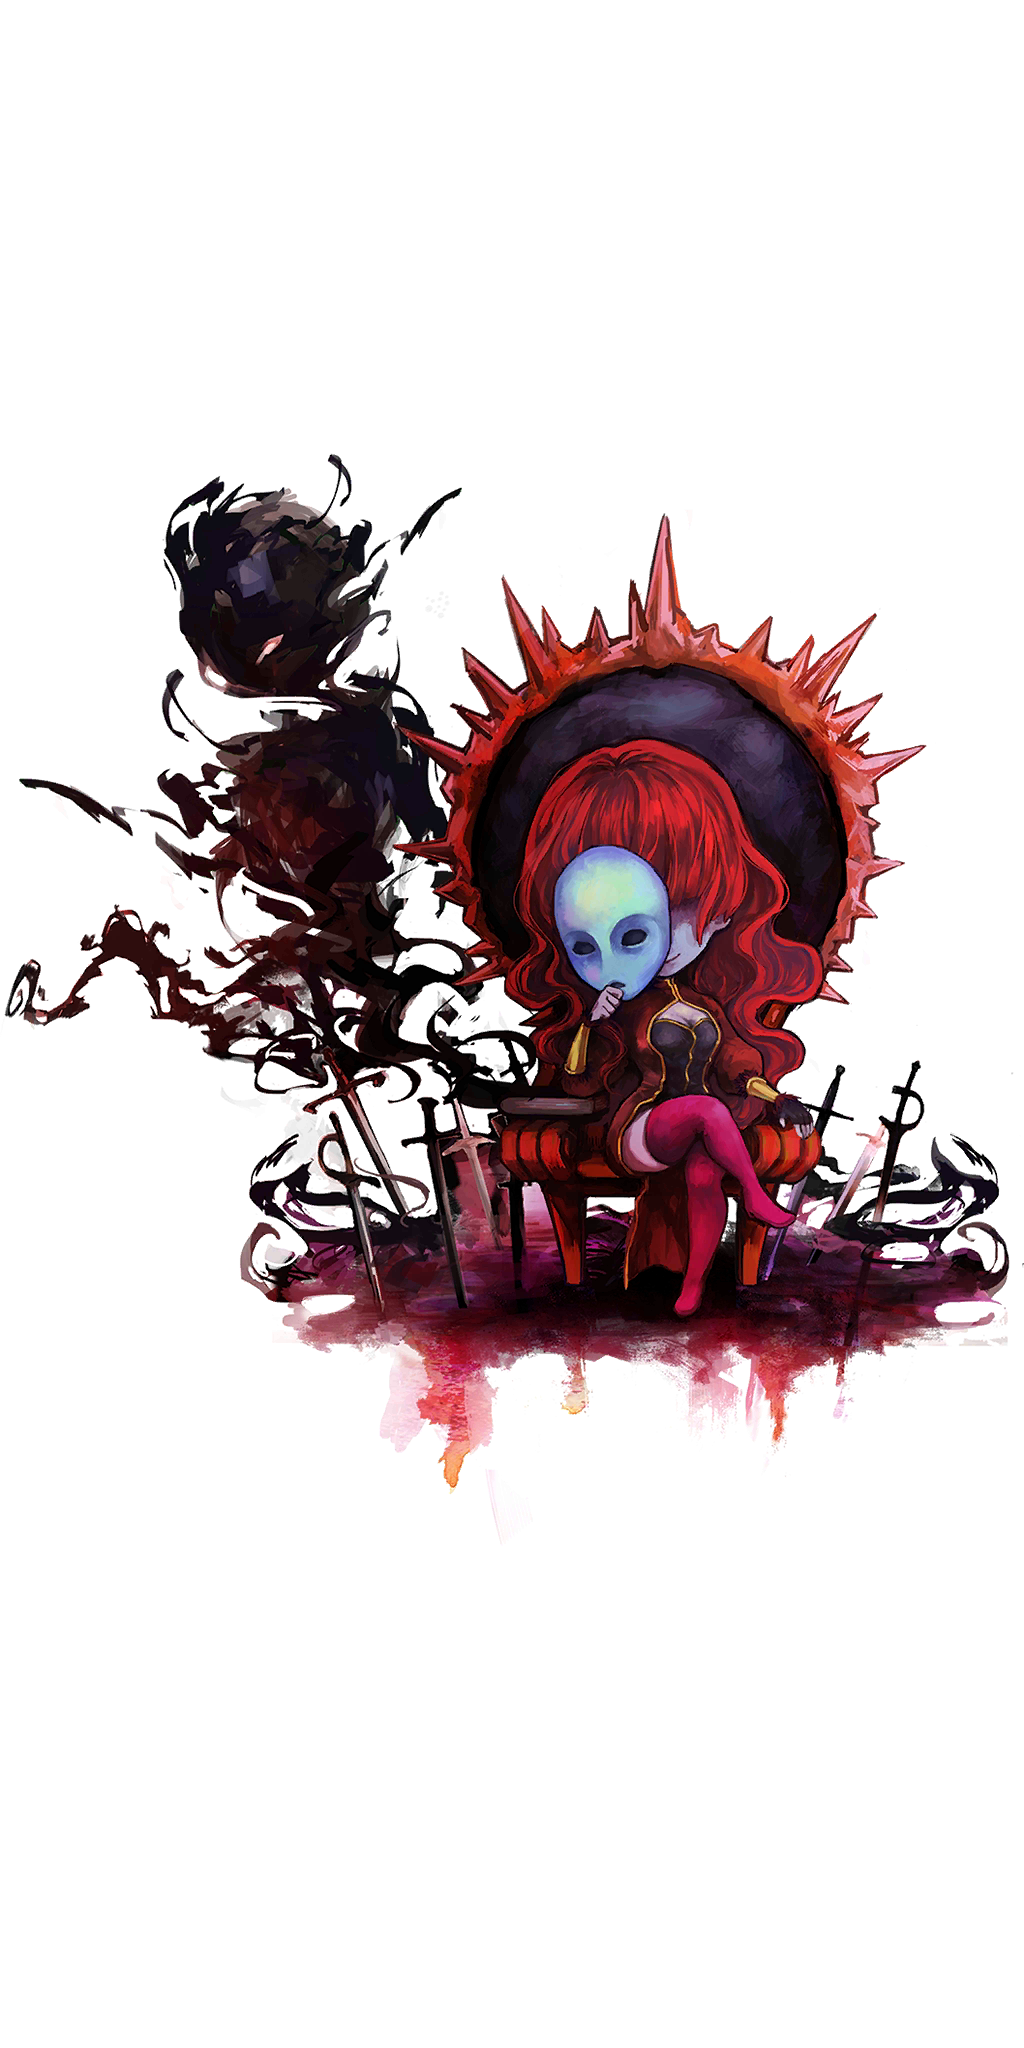 ☊ Talk mask - Masked Lady - Deemo - Voices (Mobile)